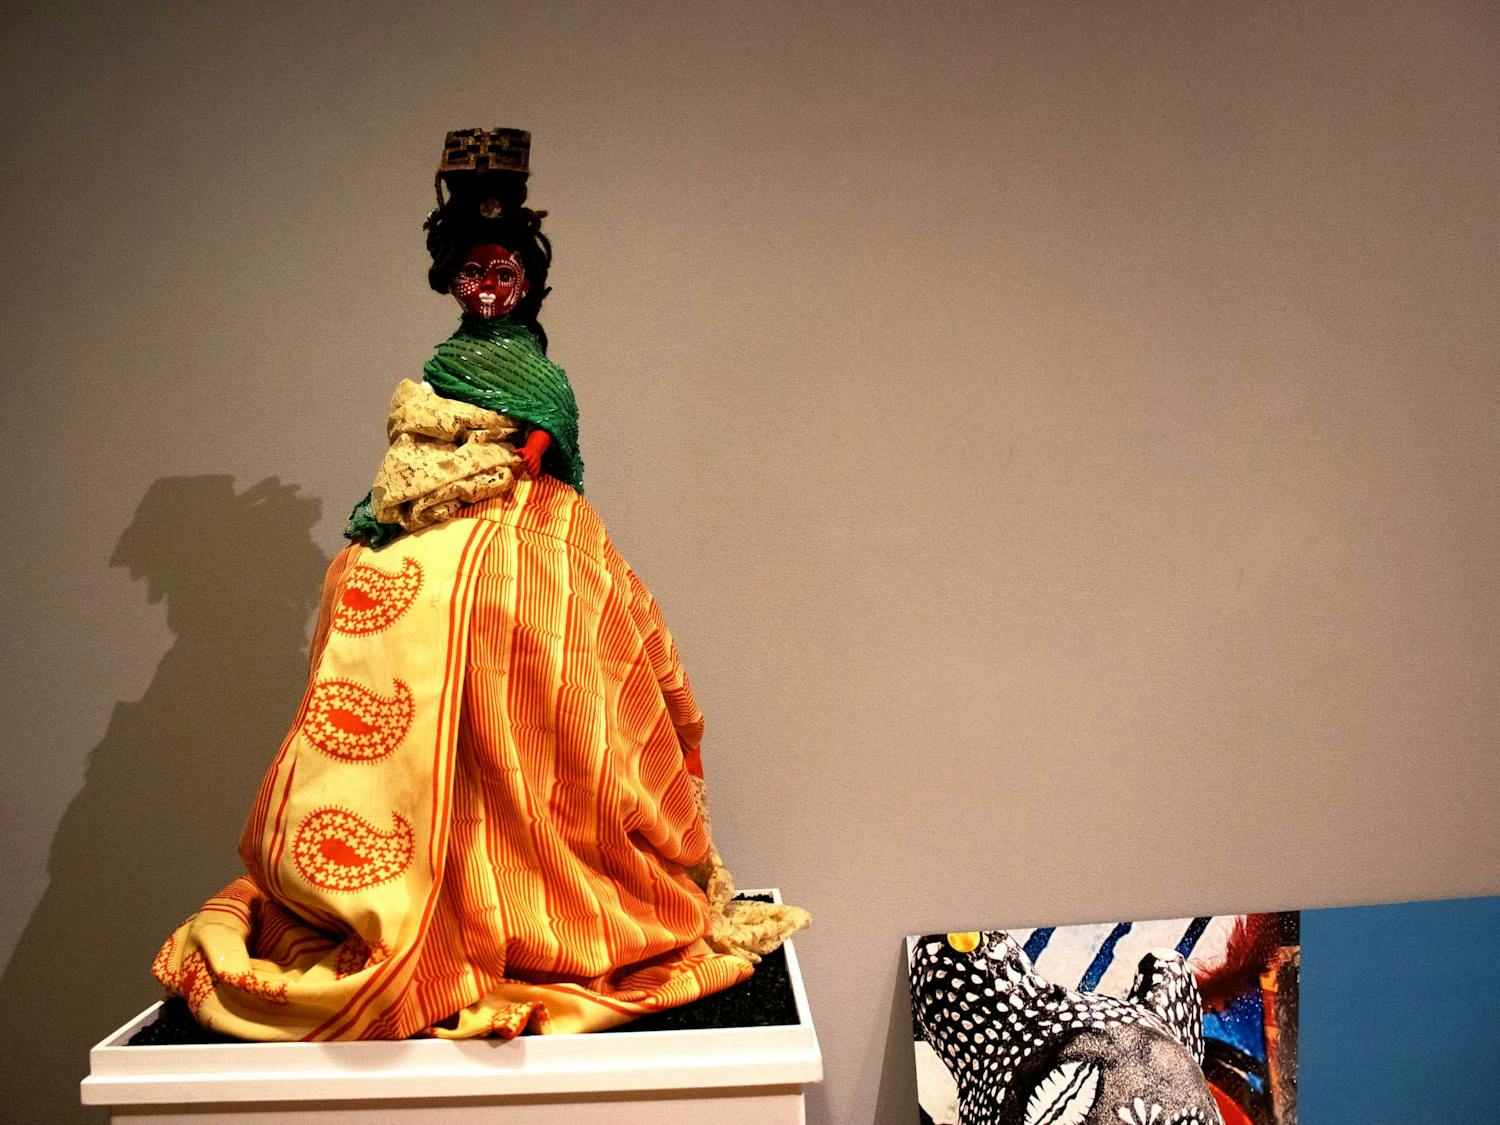 A doll on display in Stone Center's Brown gallery as a part of Anike Robinson's Gris Gris Gurlz exhibition, photographed on Monday, Sept. 19, 2022.